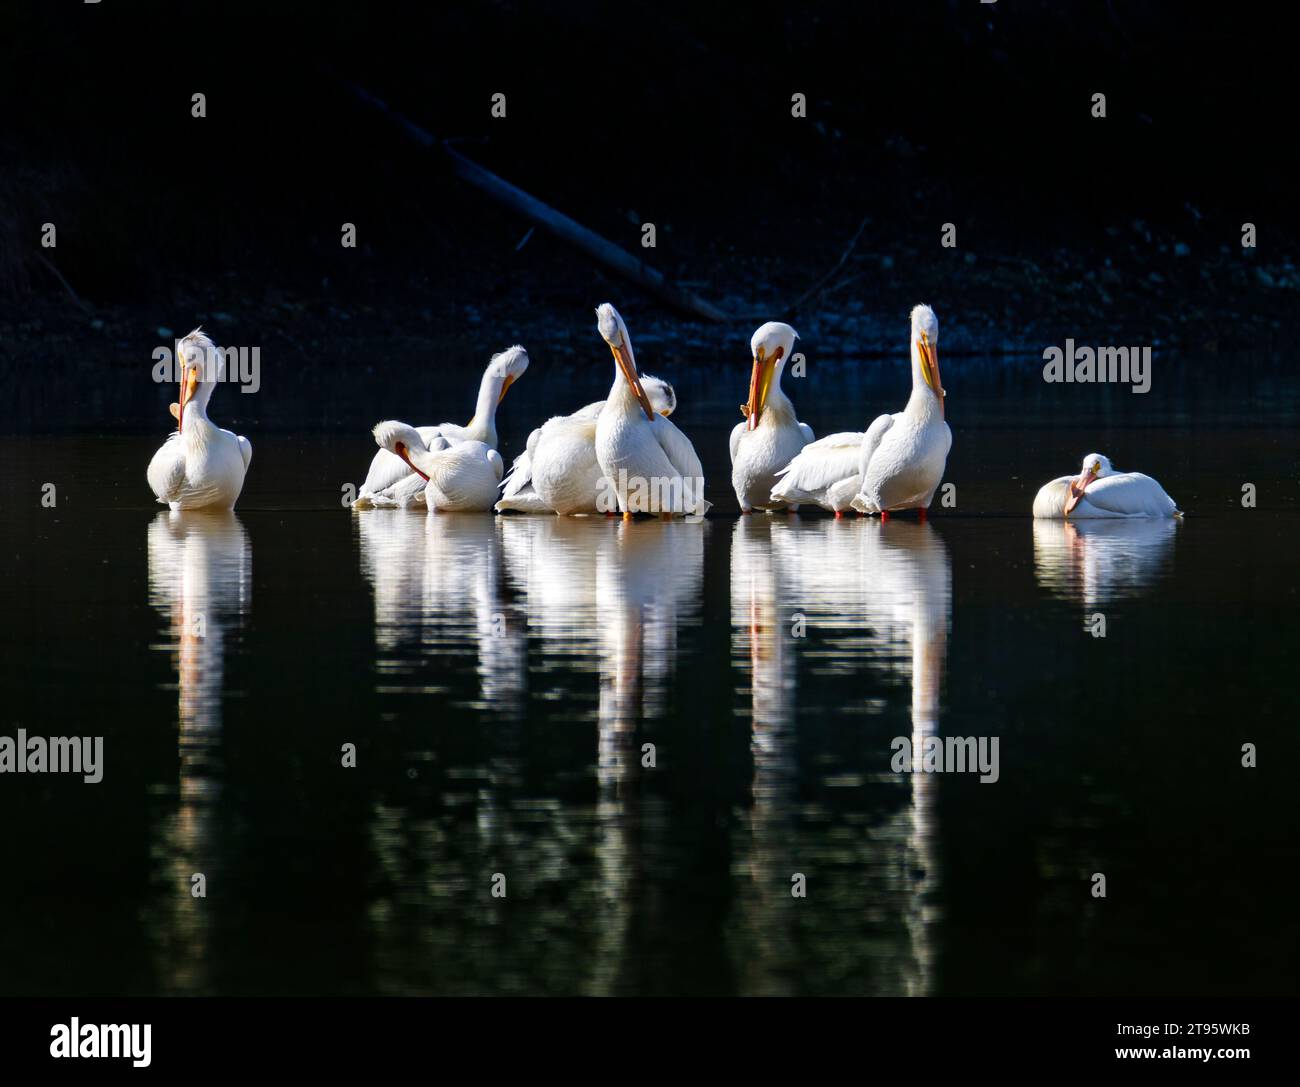 American White Pelicans (Pelicanus erythrorhynchos) rest on the Snake River in the Oxbow Bend area of Grand Teton National Park, Wyoming, USA. Stock Photo